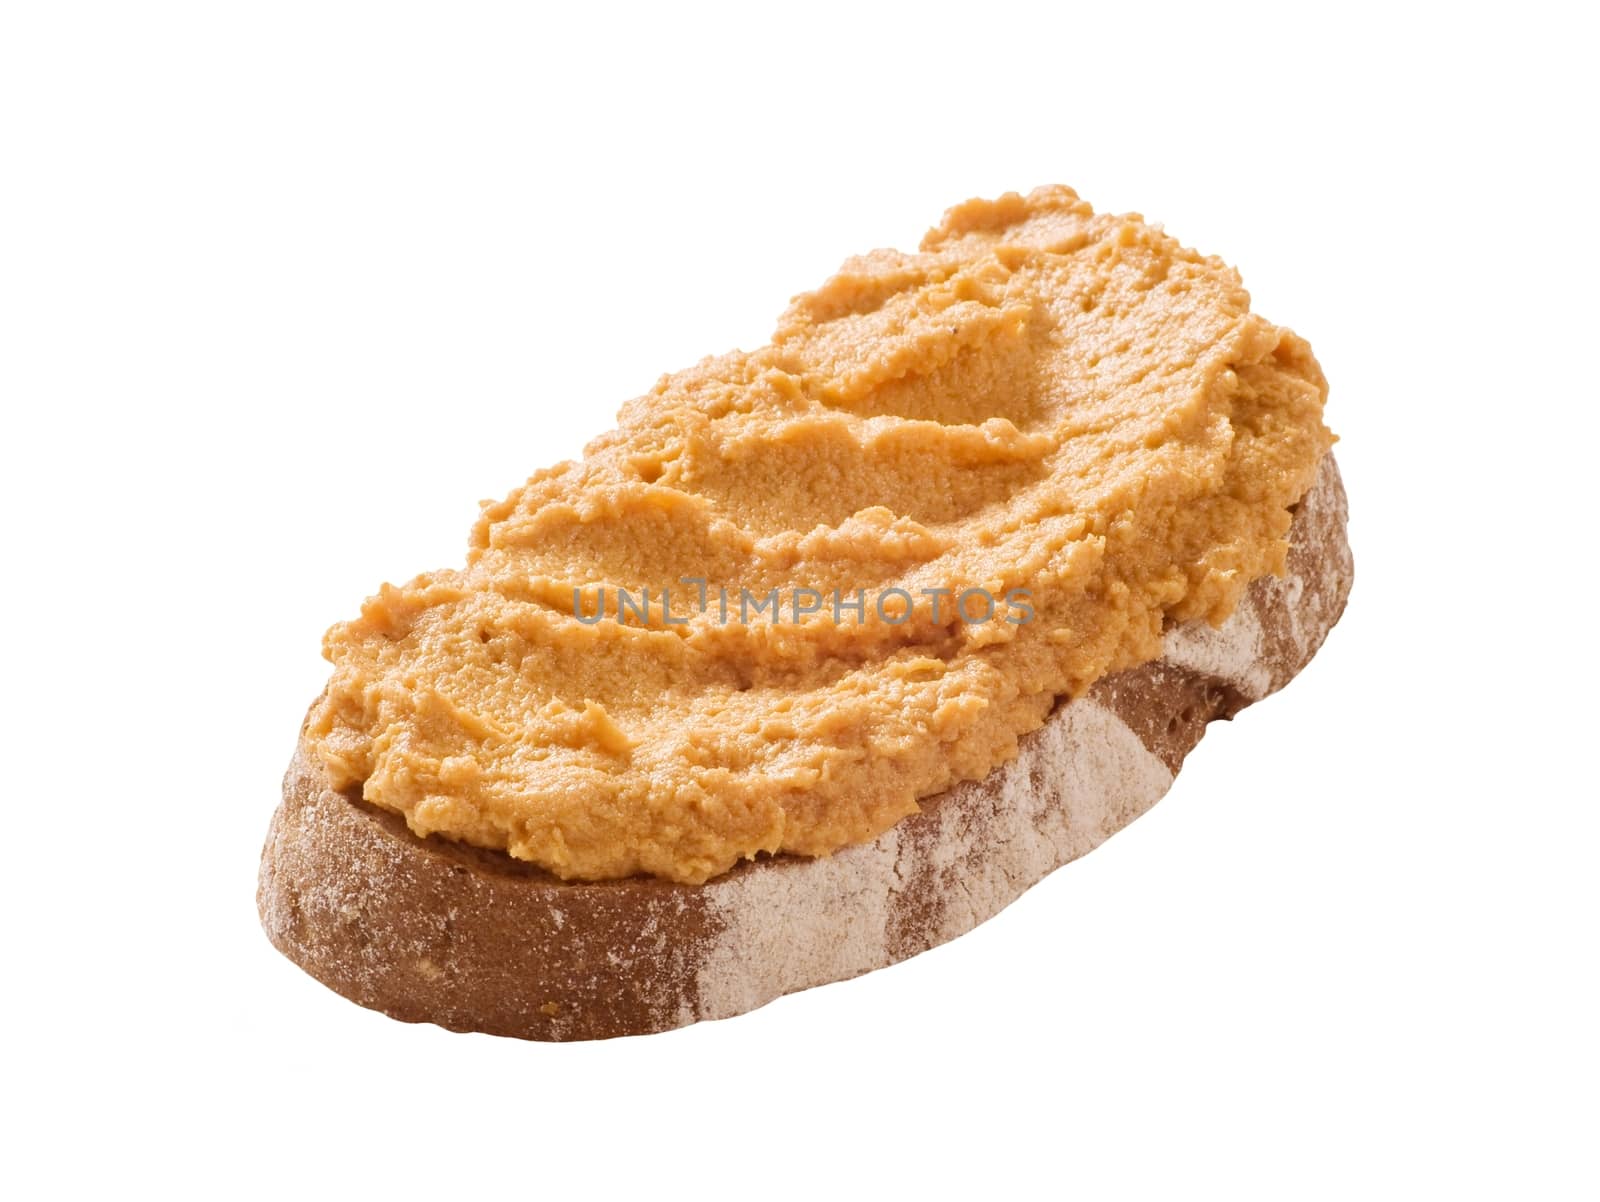 Slice of bread with spicy spread